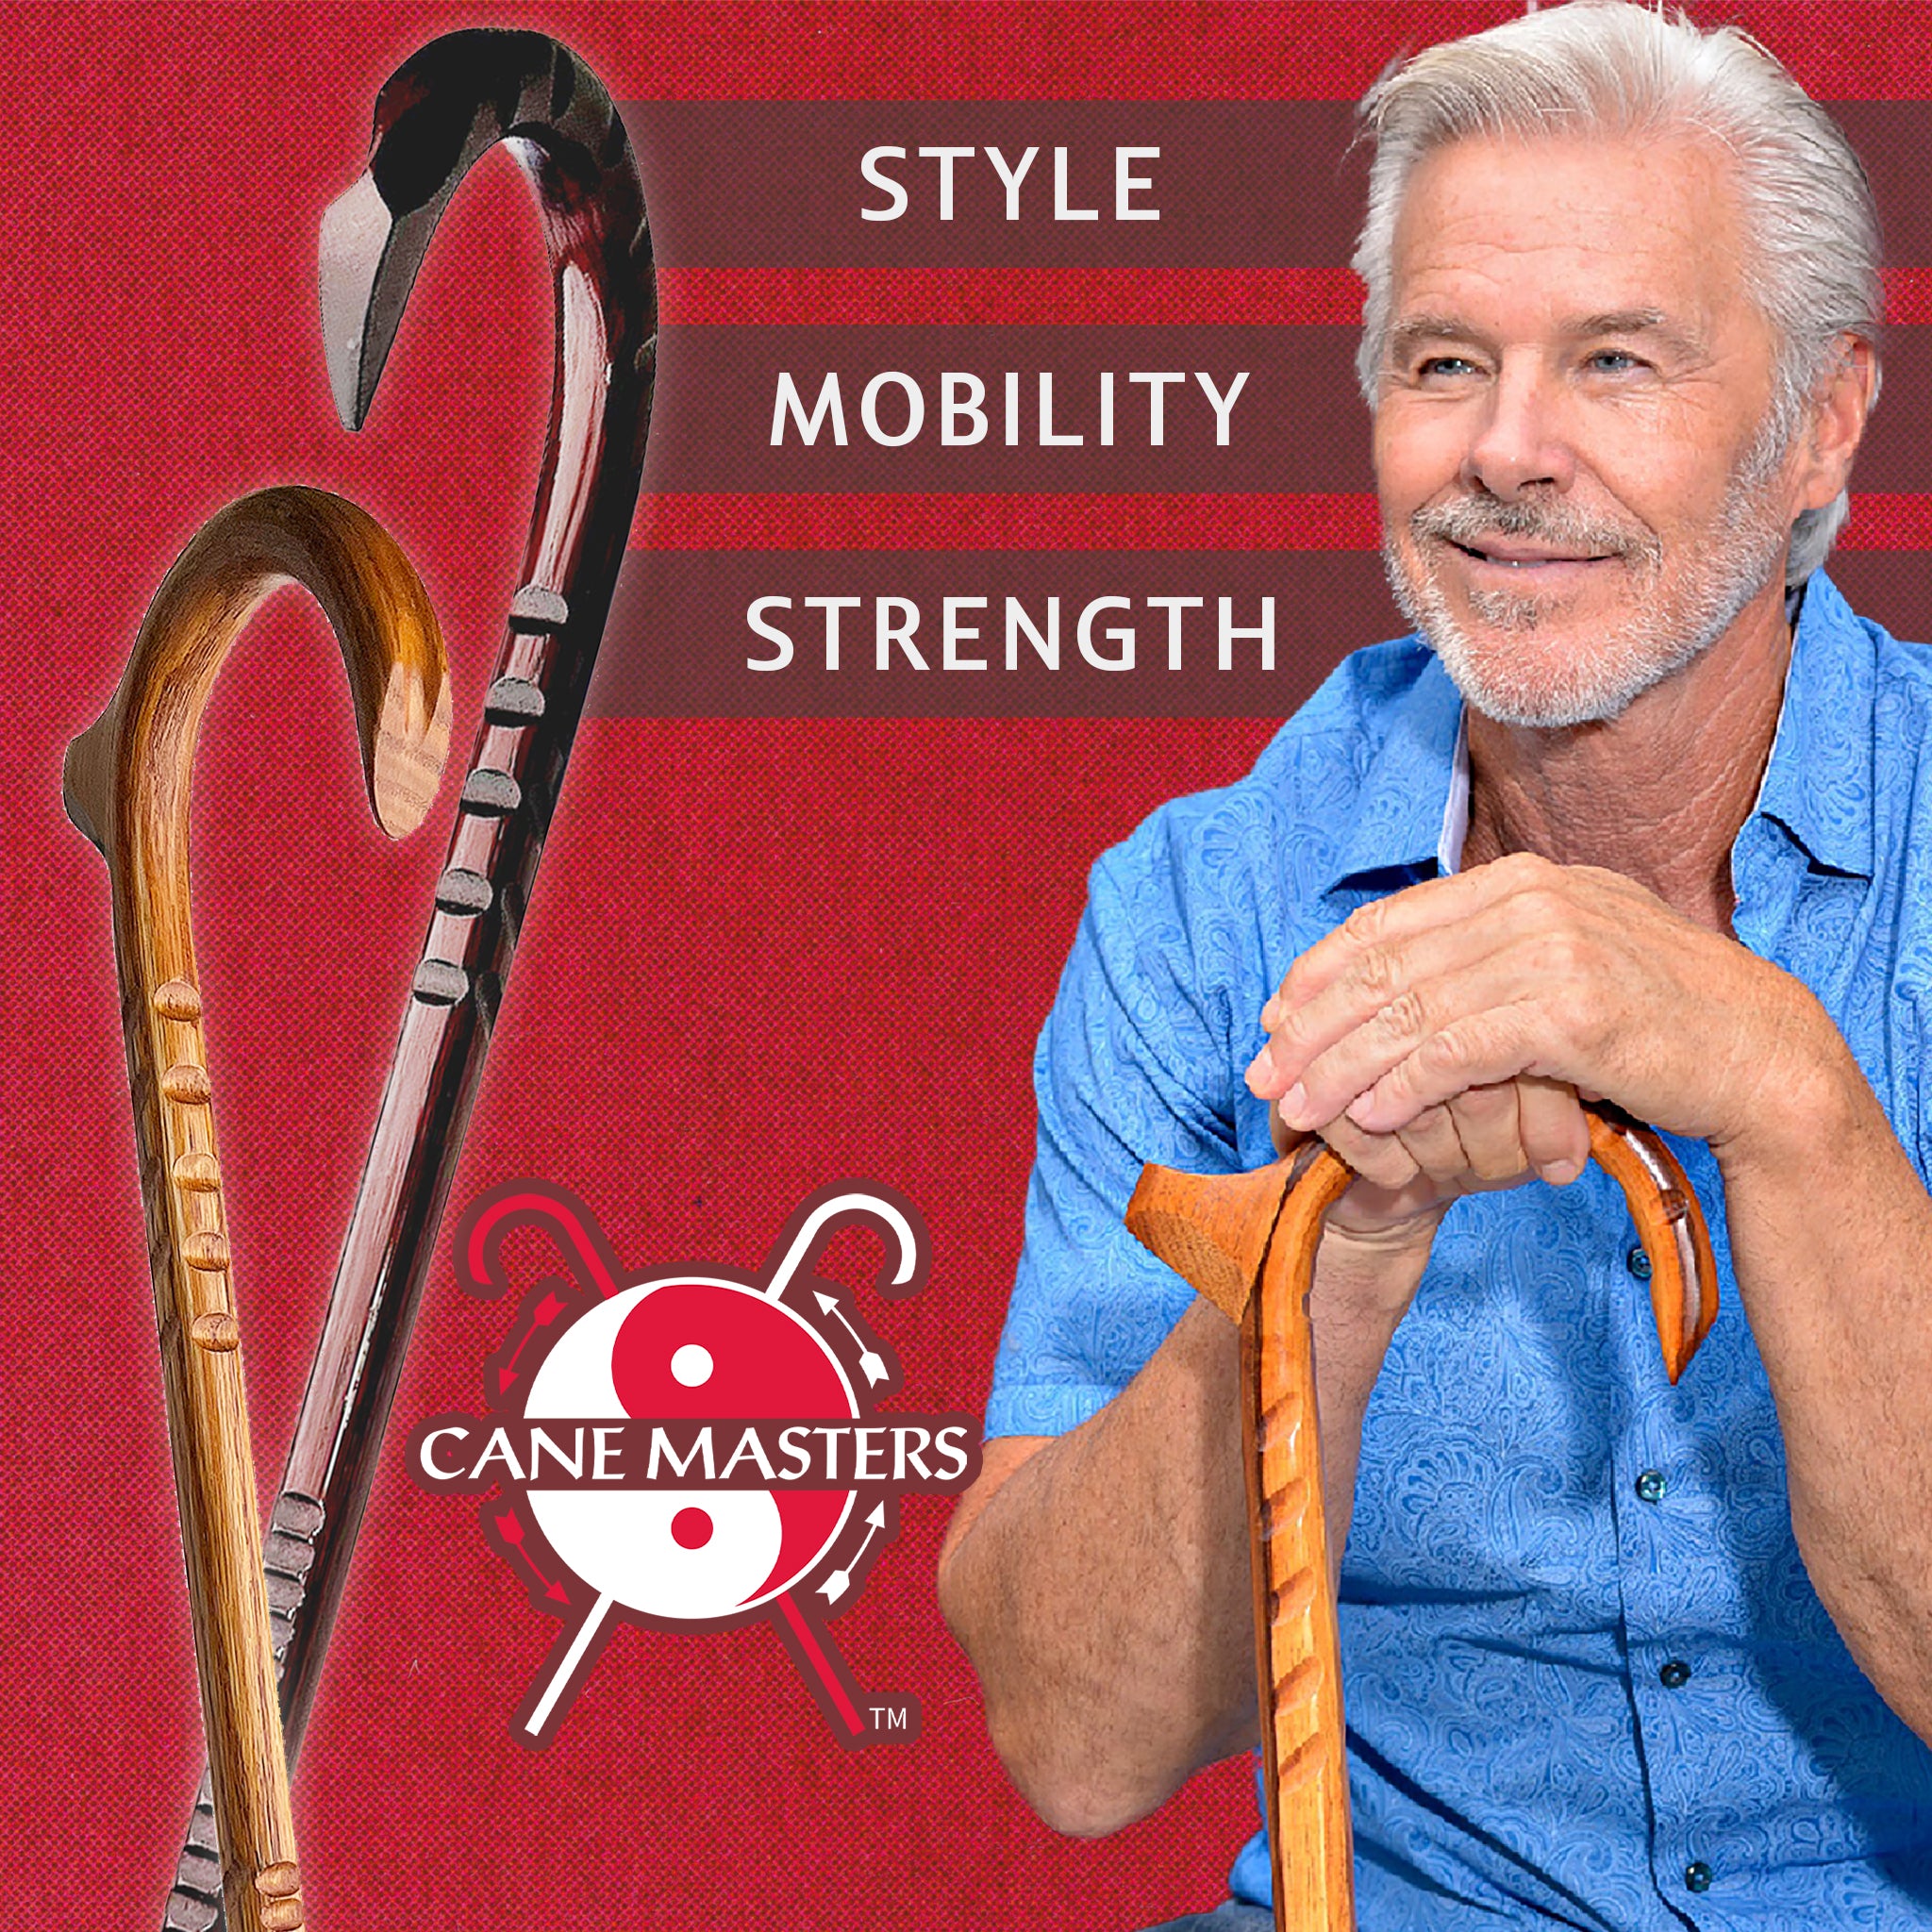 How Cane Masters Custom Canes Empower Individuals: Inspiring Stories of Strength and Confidence